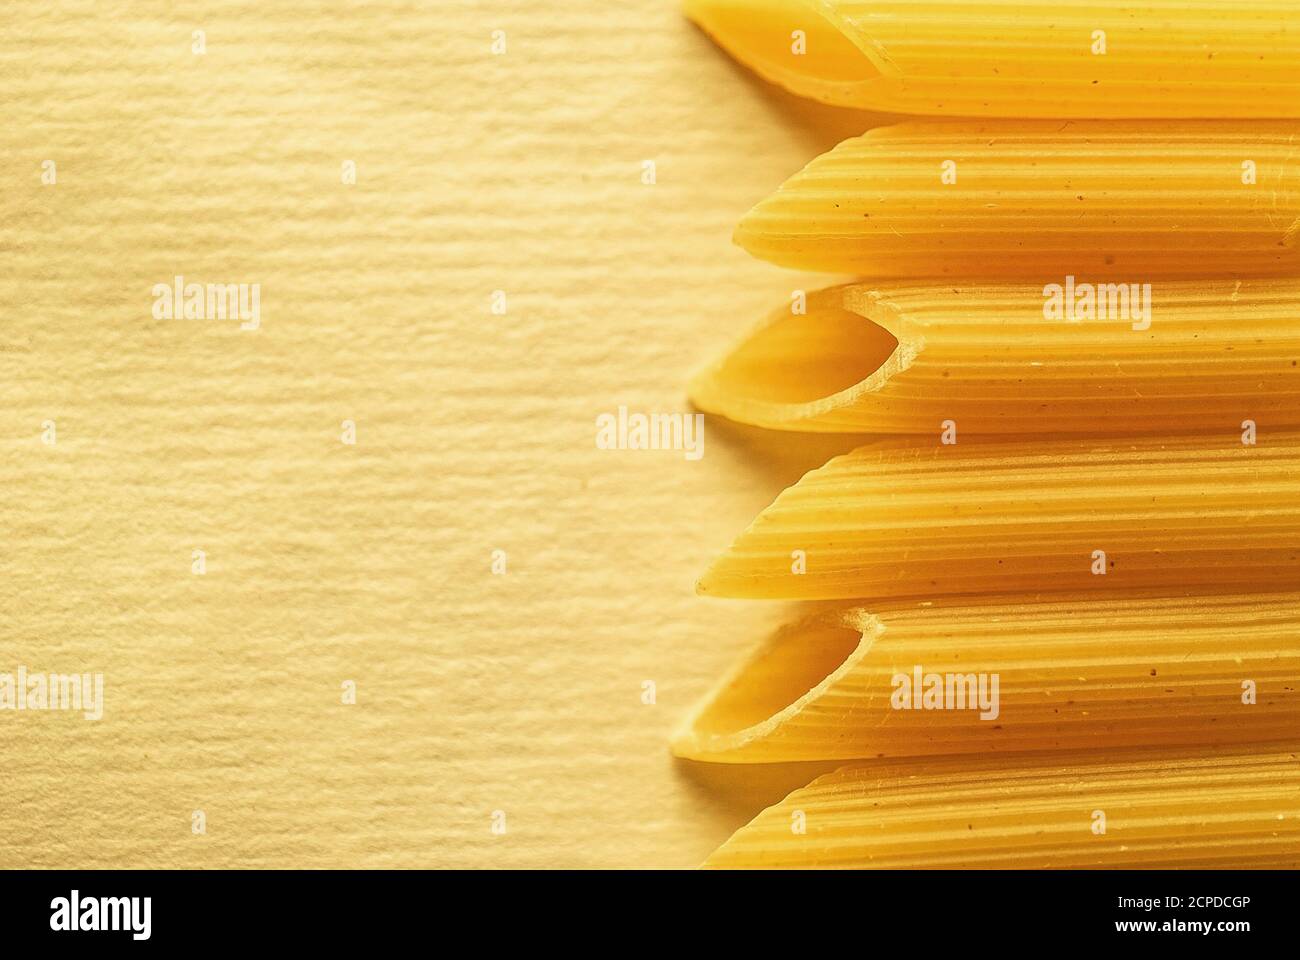 Border of dried Italian penne pasta tubes over a textured yellow background with copyspace Stock Photo